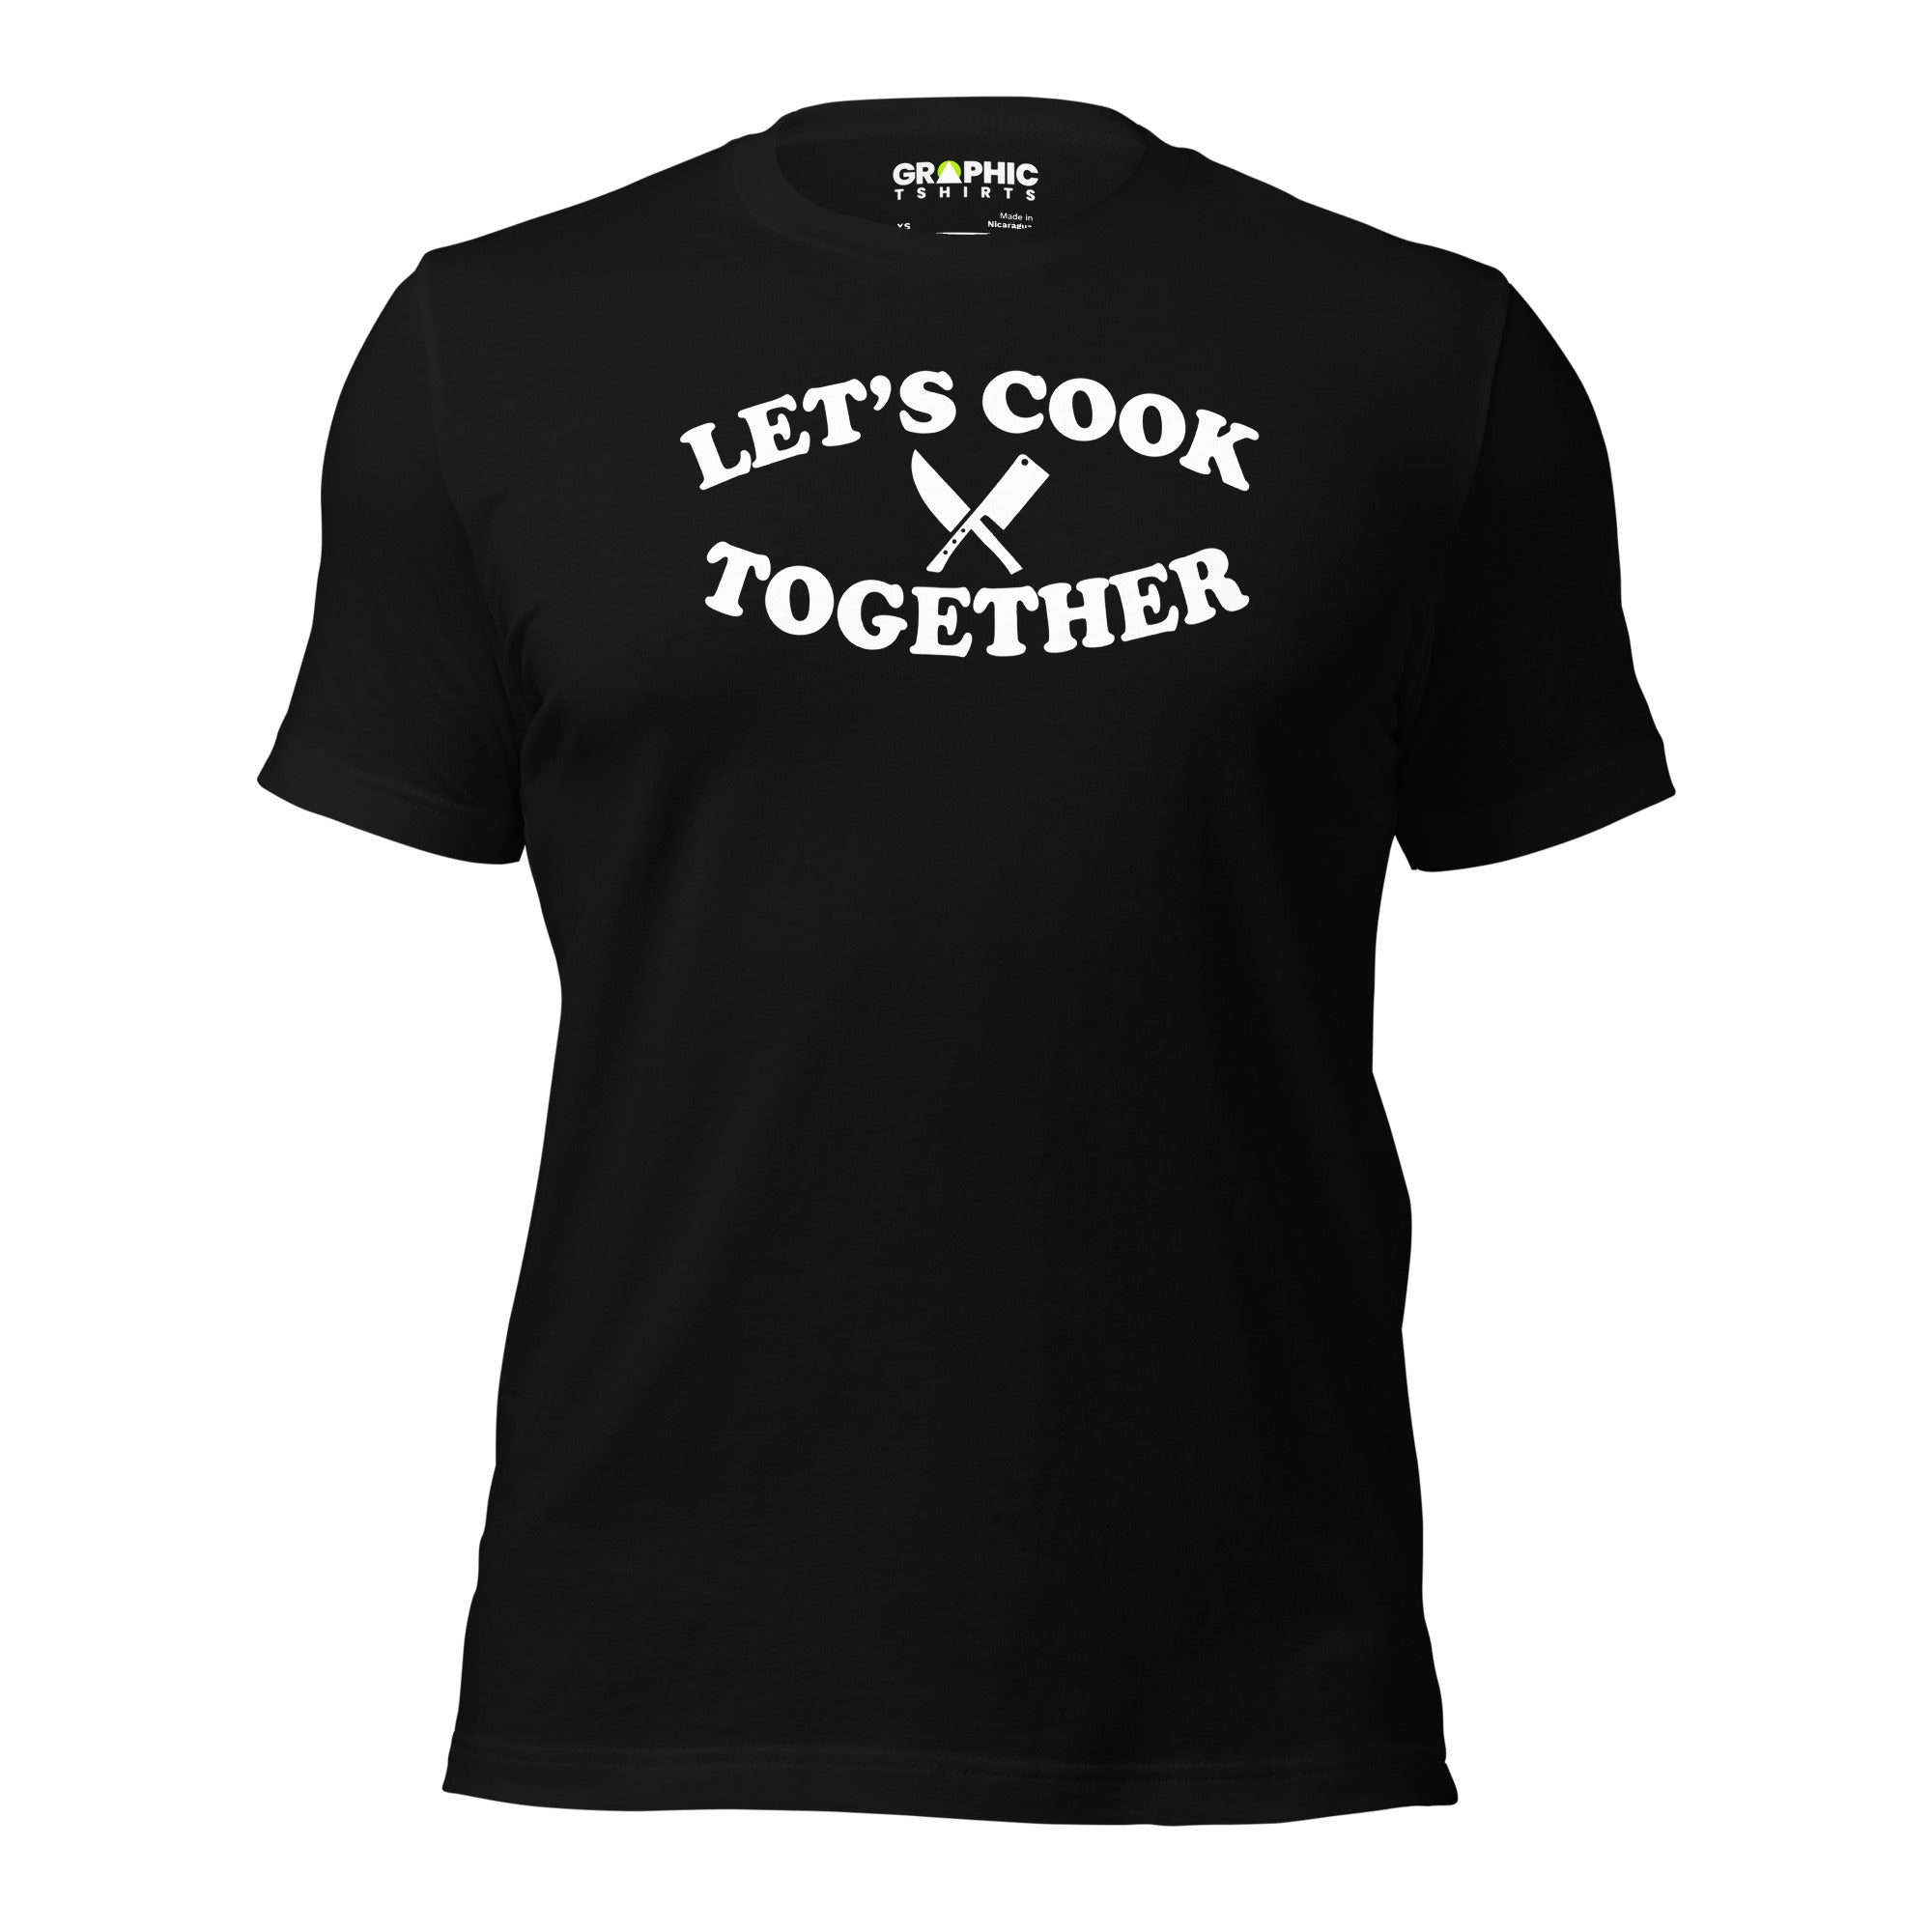 Unisex Staple T-Shirt - Let's Cook Together - GRAPHIC T-SHIRTS